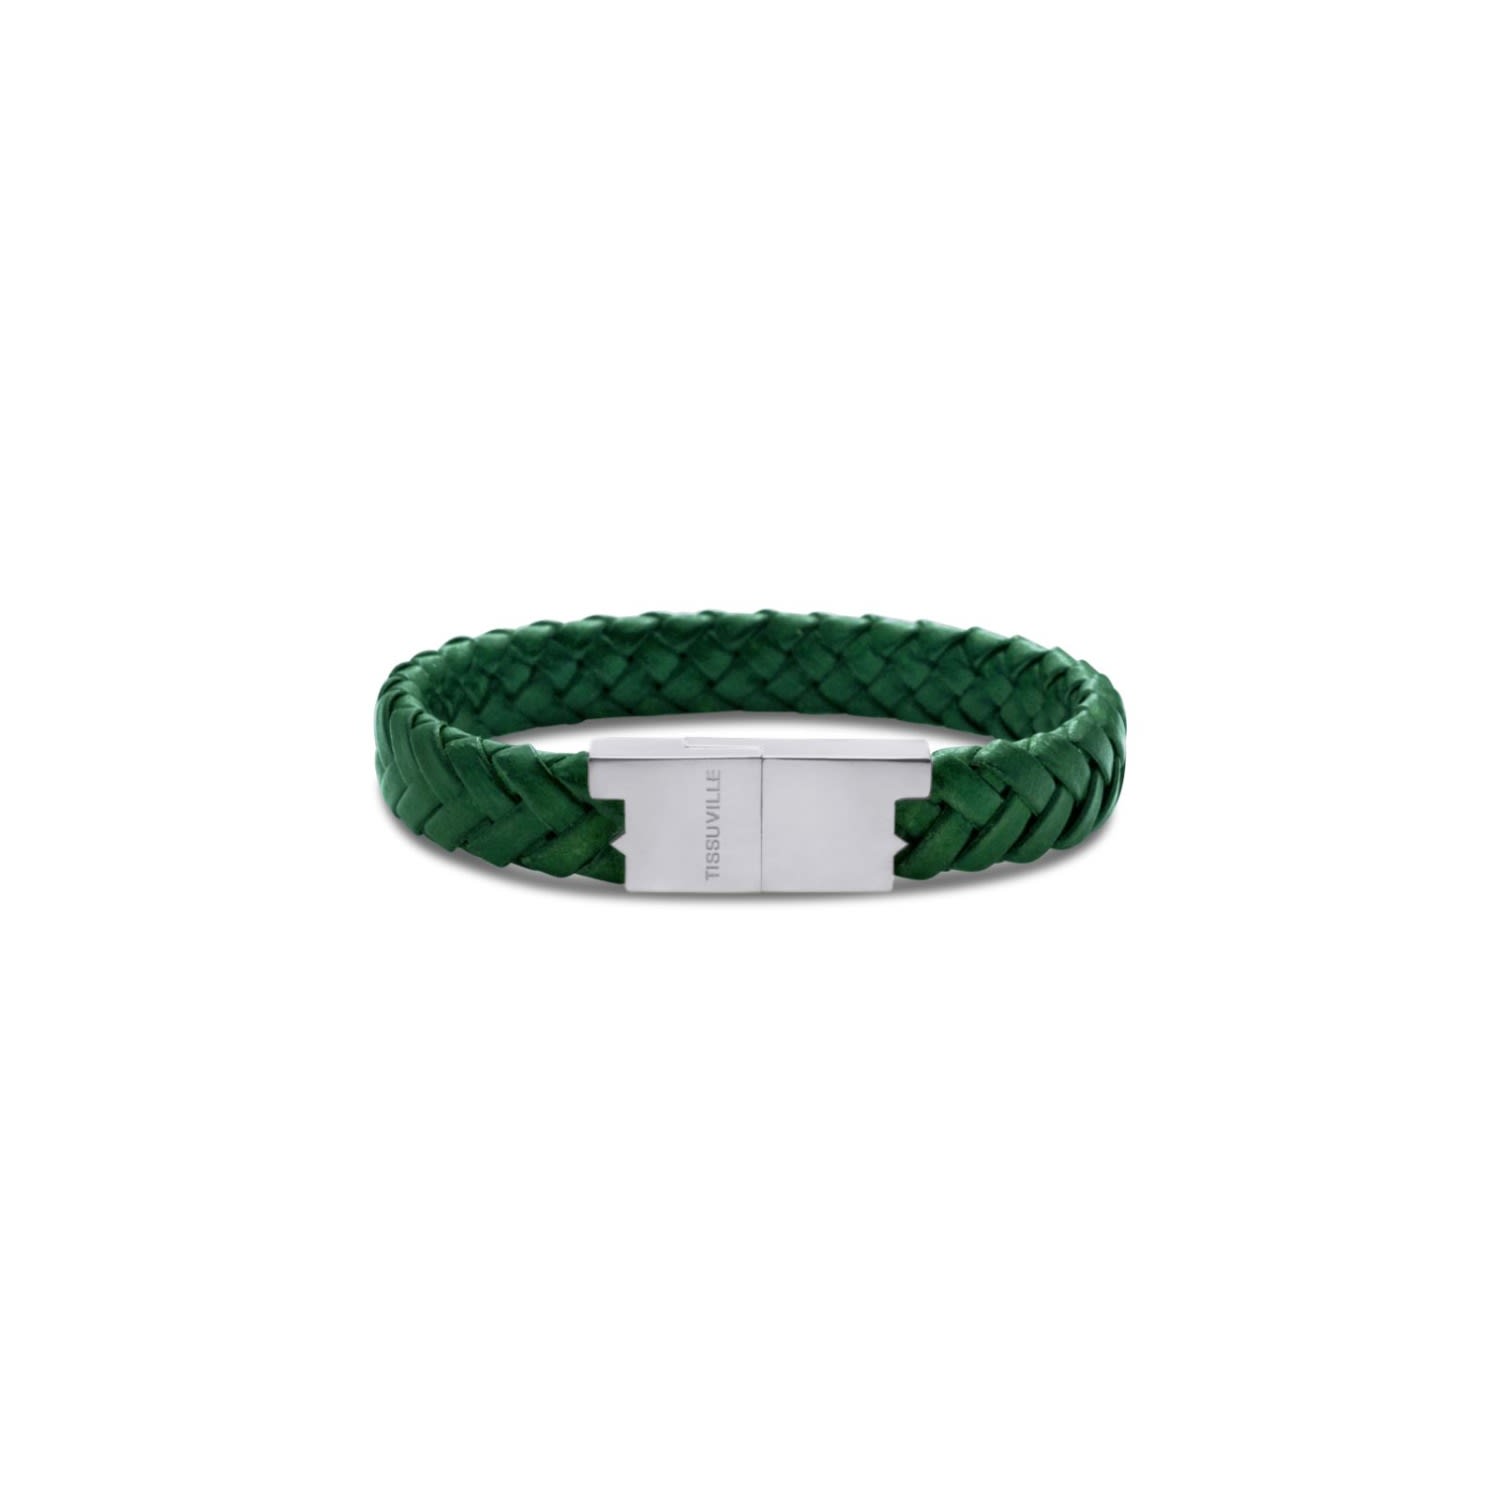 Men's Racing Green Braided Leather Bracelet With Silver-Tone Hardware Serac- Green Tissuville